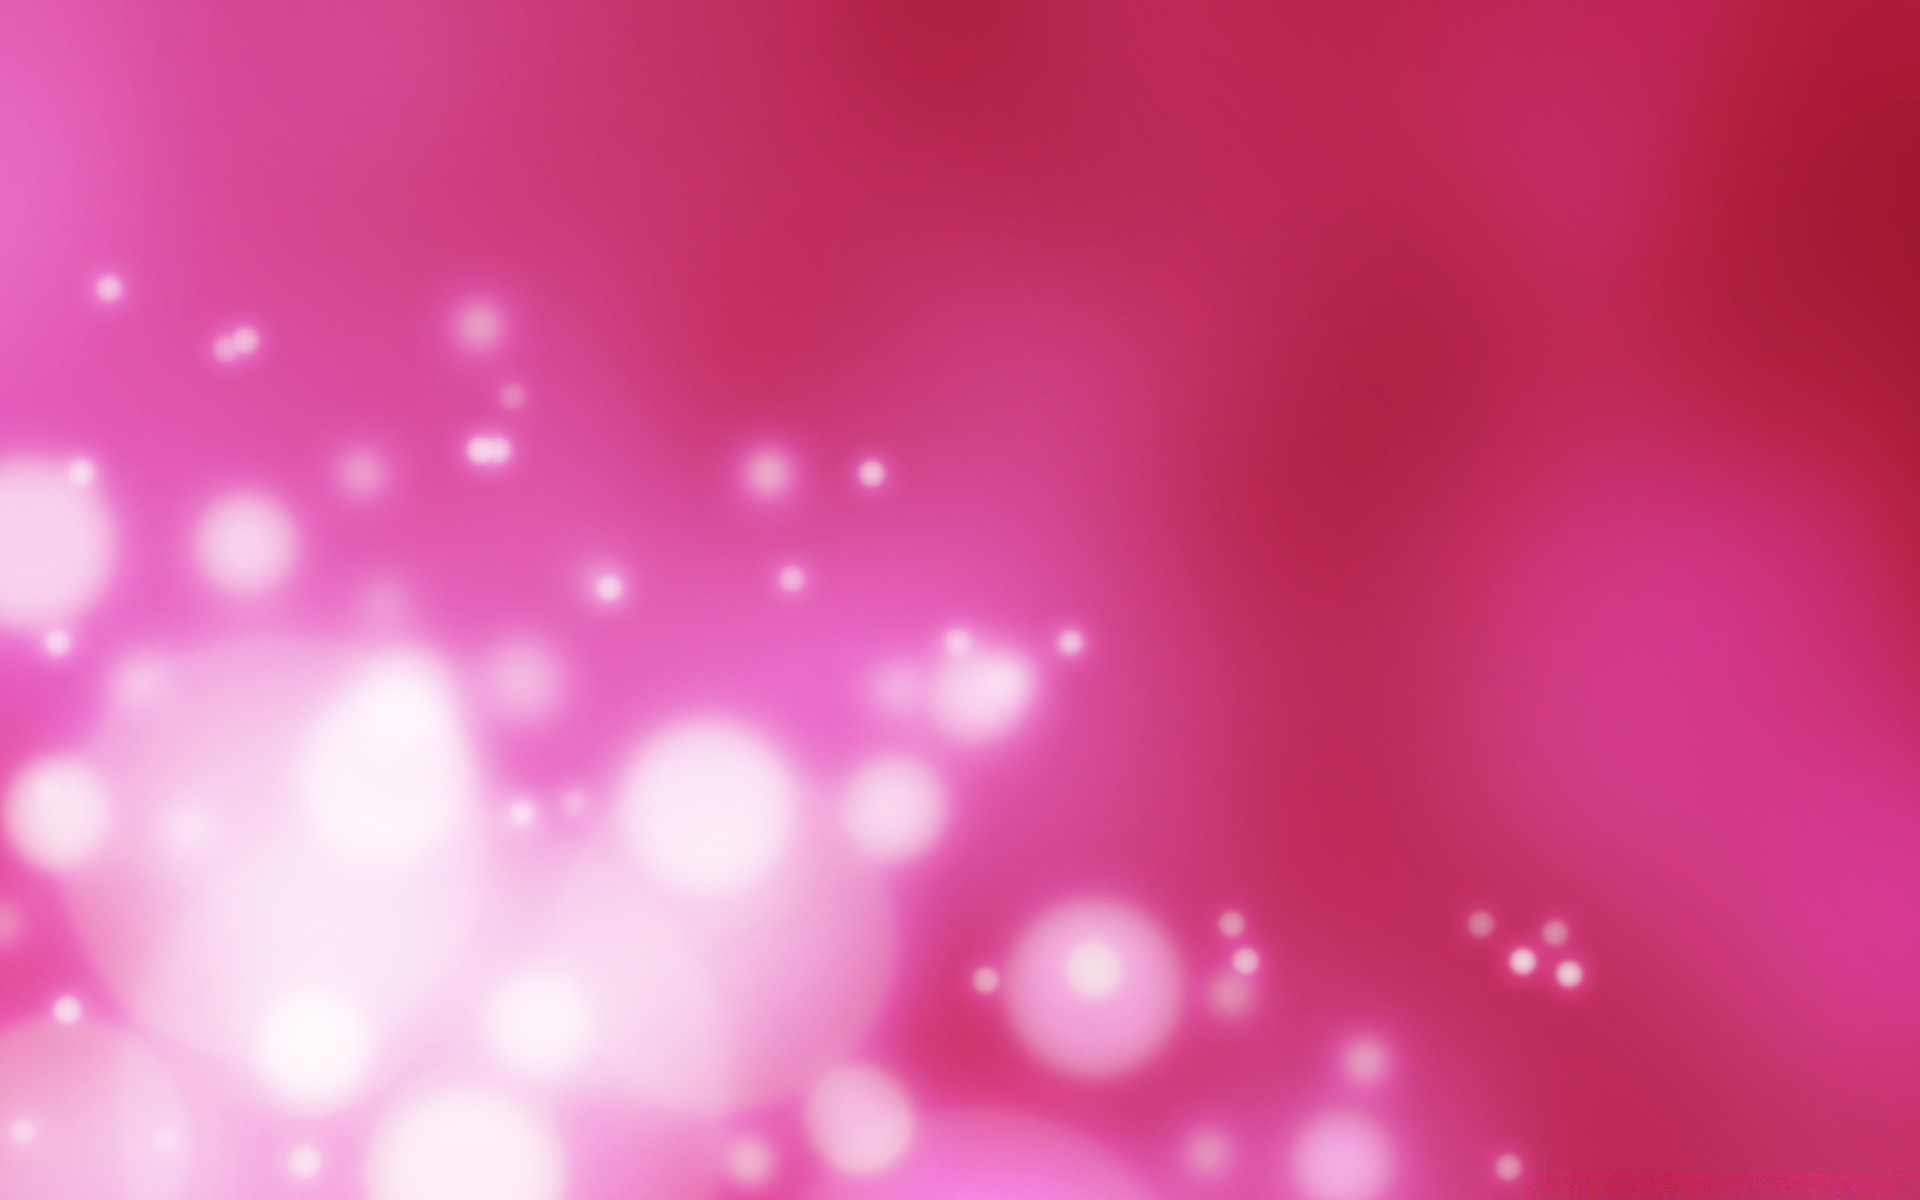 Bright Colors Blur Shining Abstract Glisten Bright - High Resolution Pink Background Hd - HD Wallpaper 